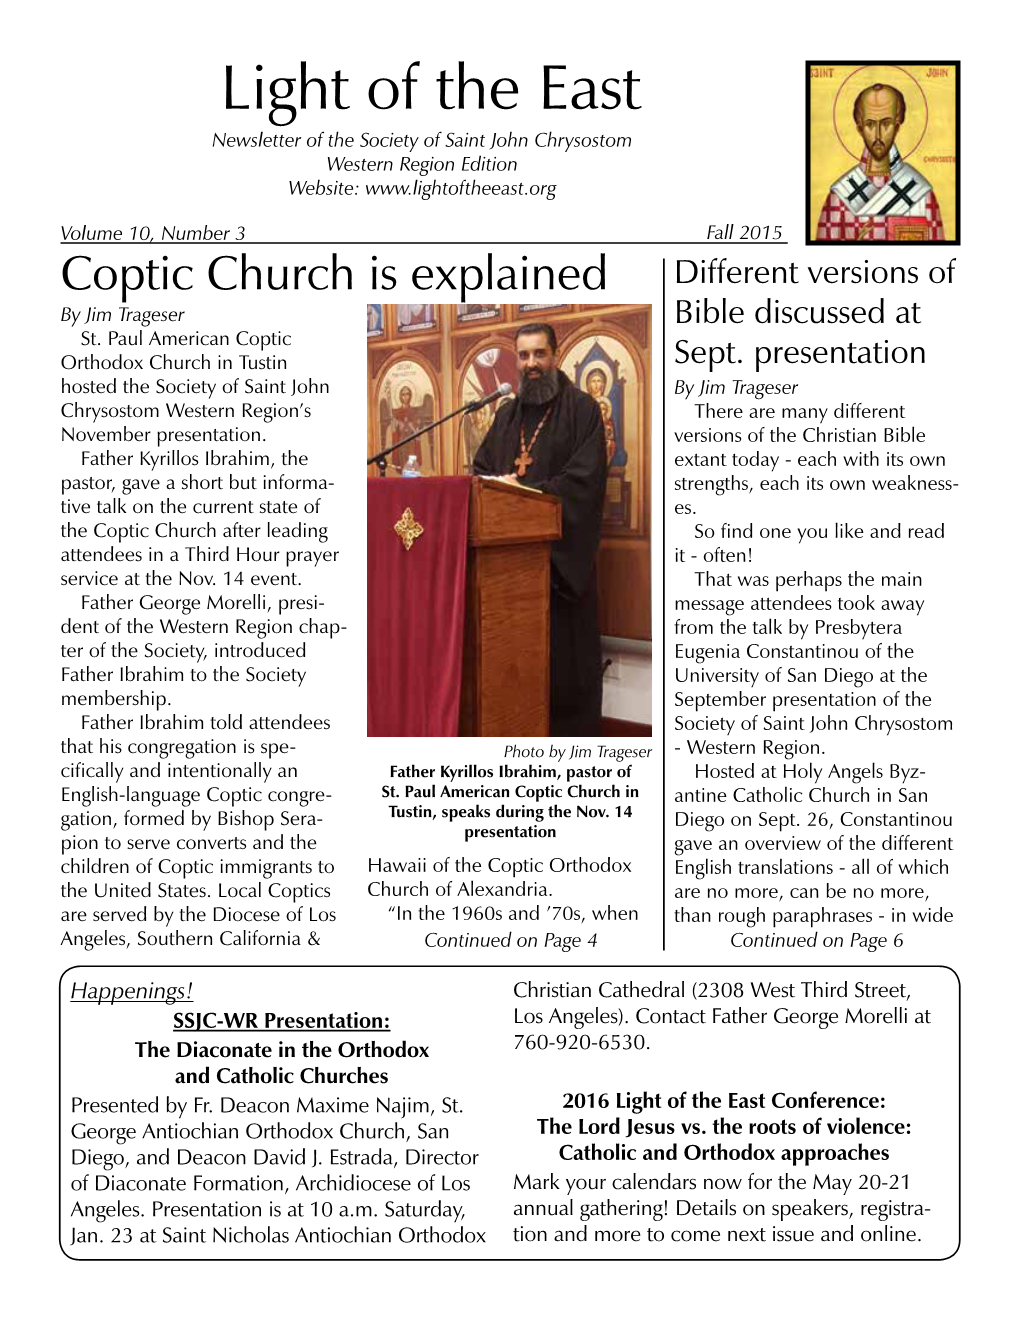 Fall 2015 Coptic Church Is Explained Different Versions of by Jim Trageser Bible Discussed at St